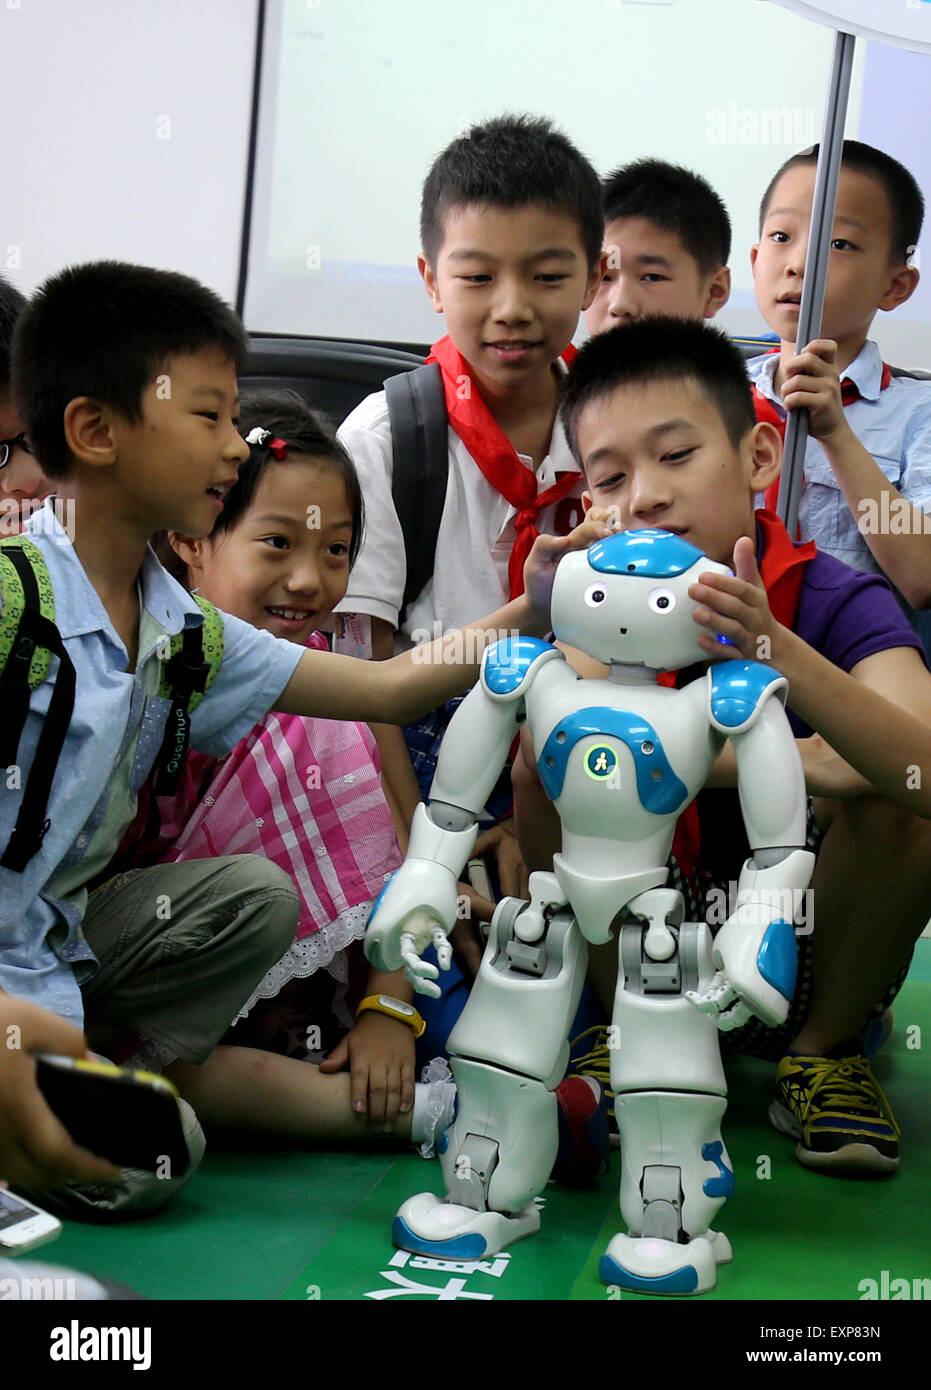 Shanghai, China. 16th July, 2015. Children interested in scientific invention meet Robot Nao at a robot laboratory in Shanghai Jiaotong University, east China, July 16, 2015. Nao is a 58-centimeter tall robot developed and manufactured by Aldebaran Robotics, a Paris-based company. Credit:  Liu Ying/Xinhua/Alamy Live News Stock Photo